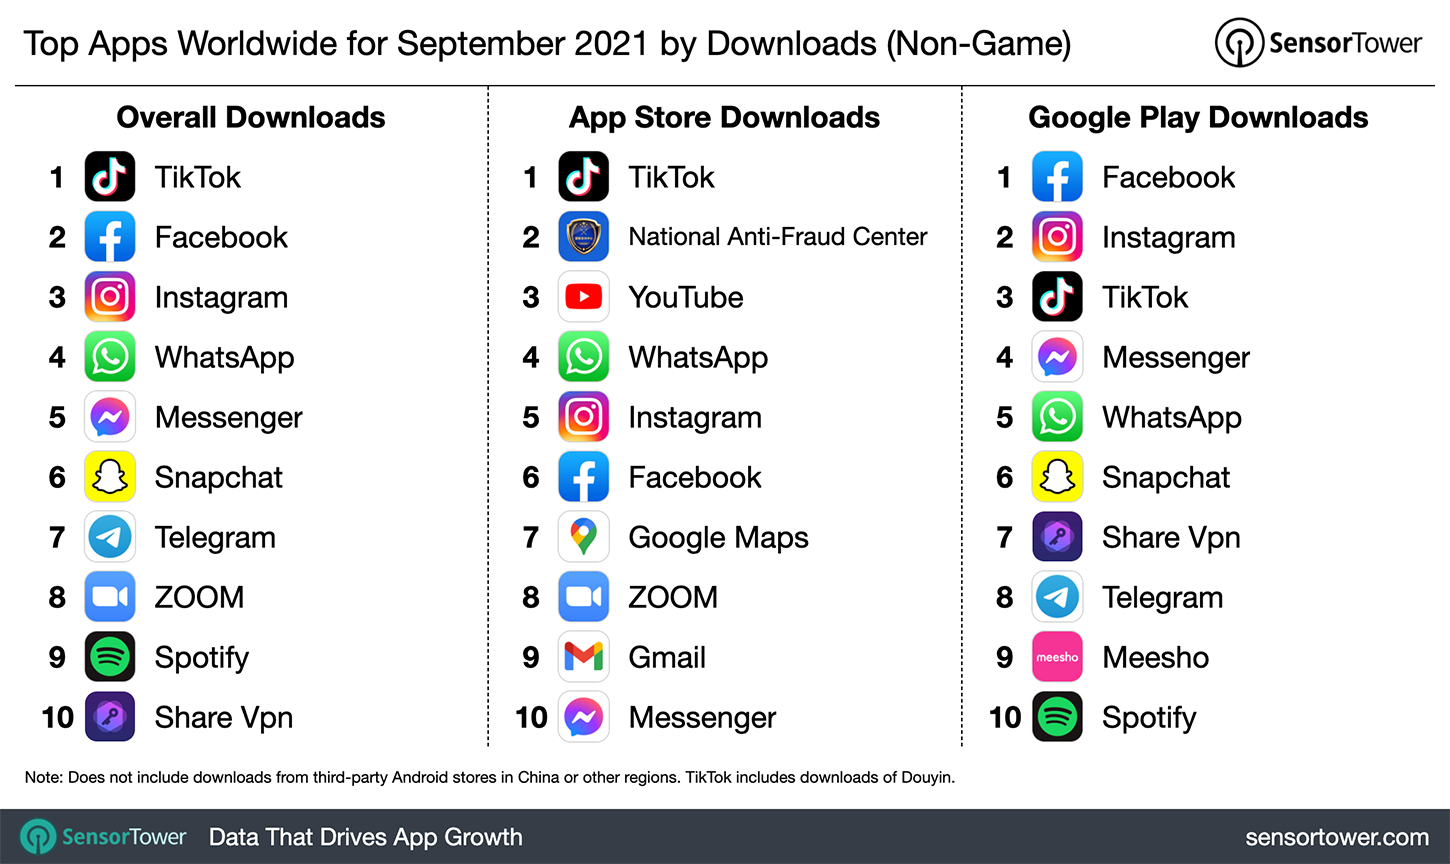 Image source: SensorTower. Top Apps Worldwide for September 2021 by Downloads